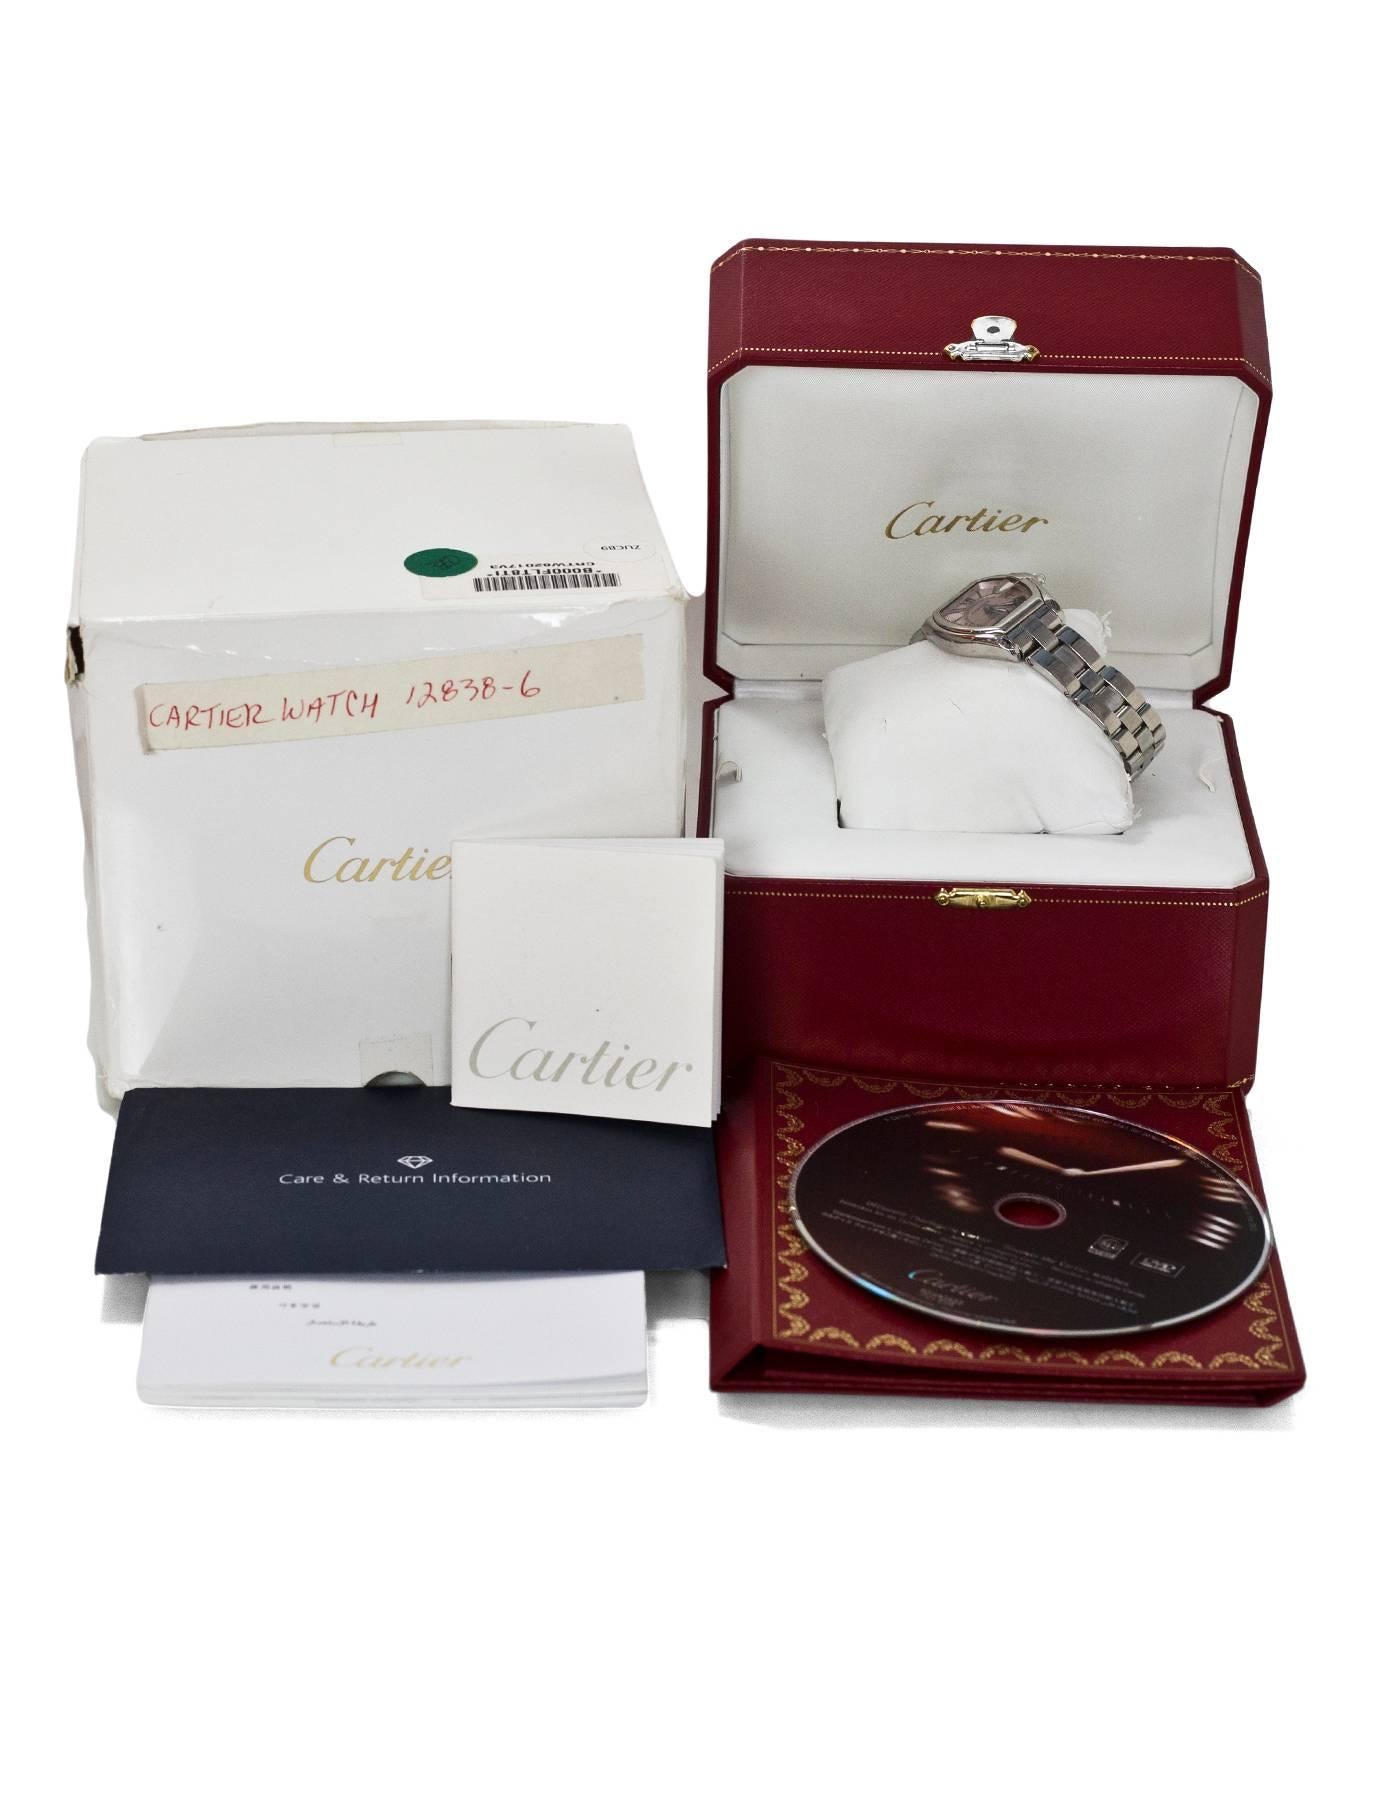 Cartier Stainless Steel 36mm Roadster Quartz Watch with Box and Case 6